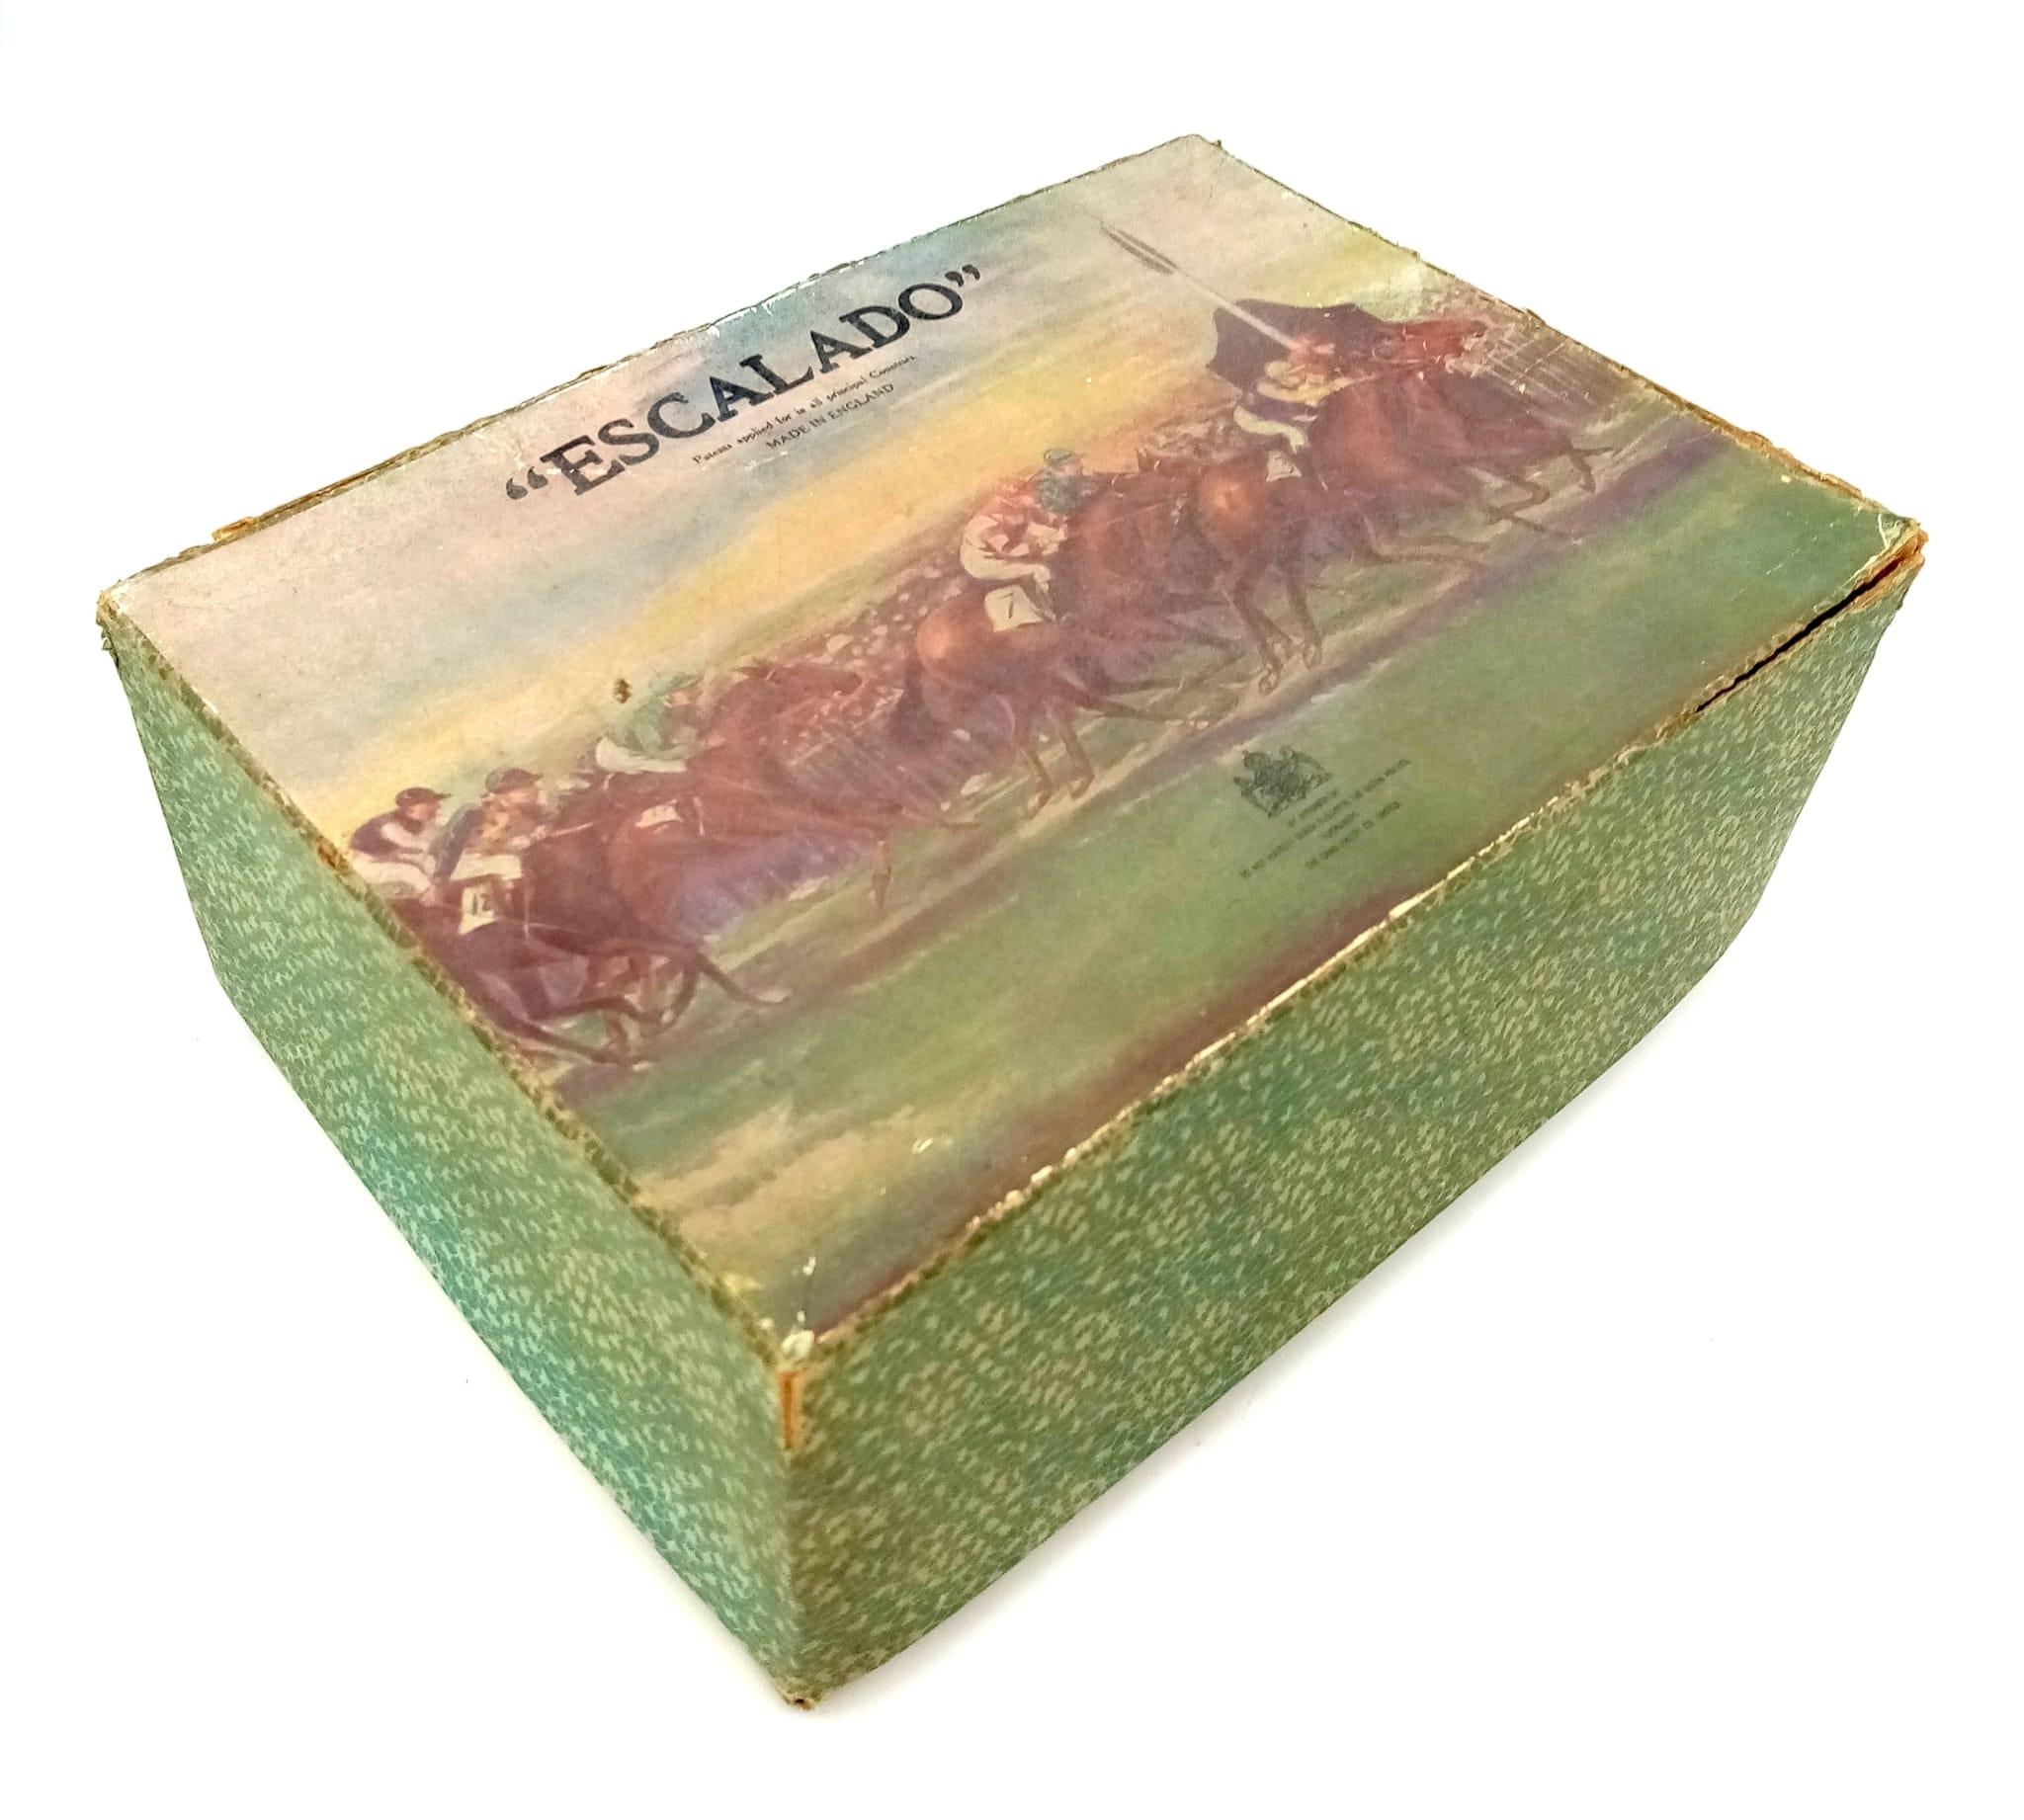 A Vintage Escalado Table-Top Horse Racing Game in Original Box. All pieces seem to be in place.